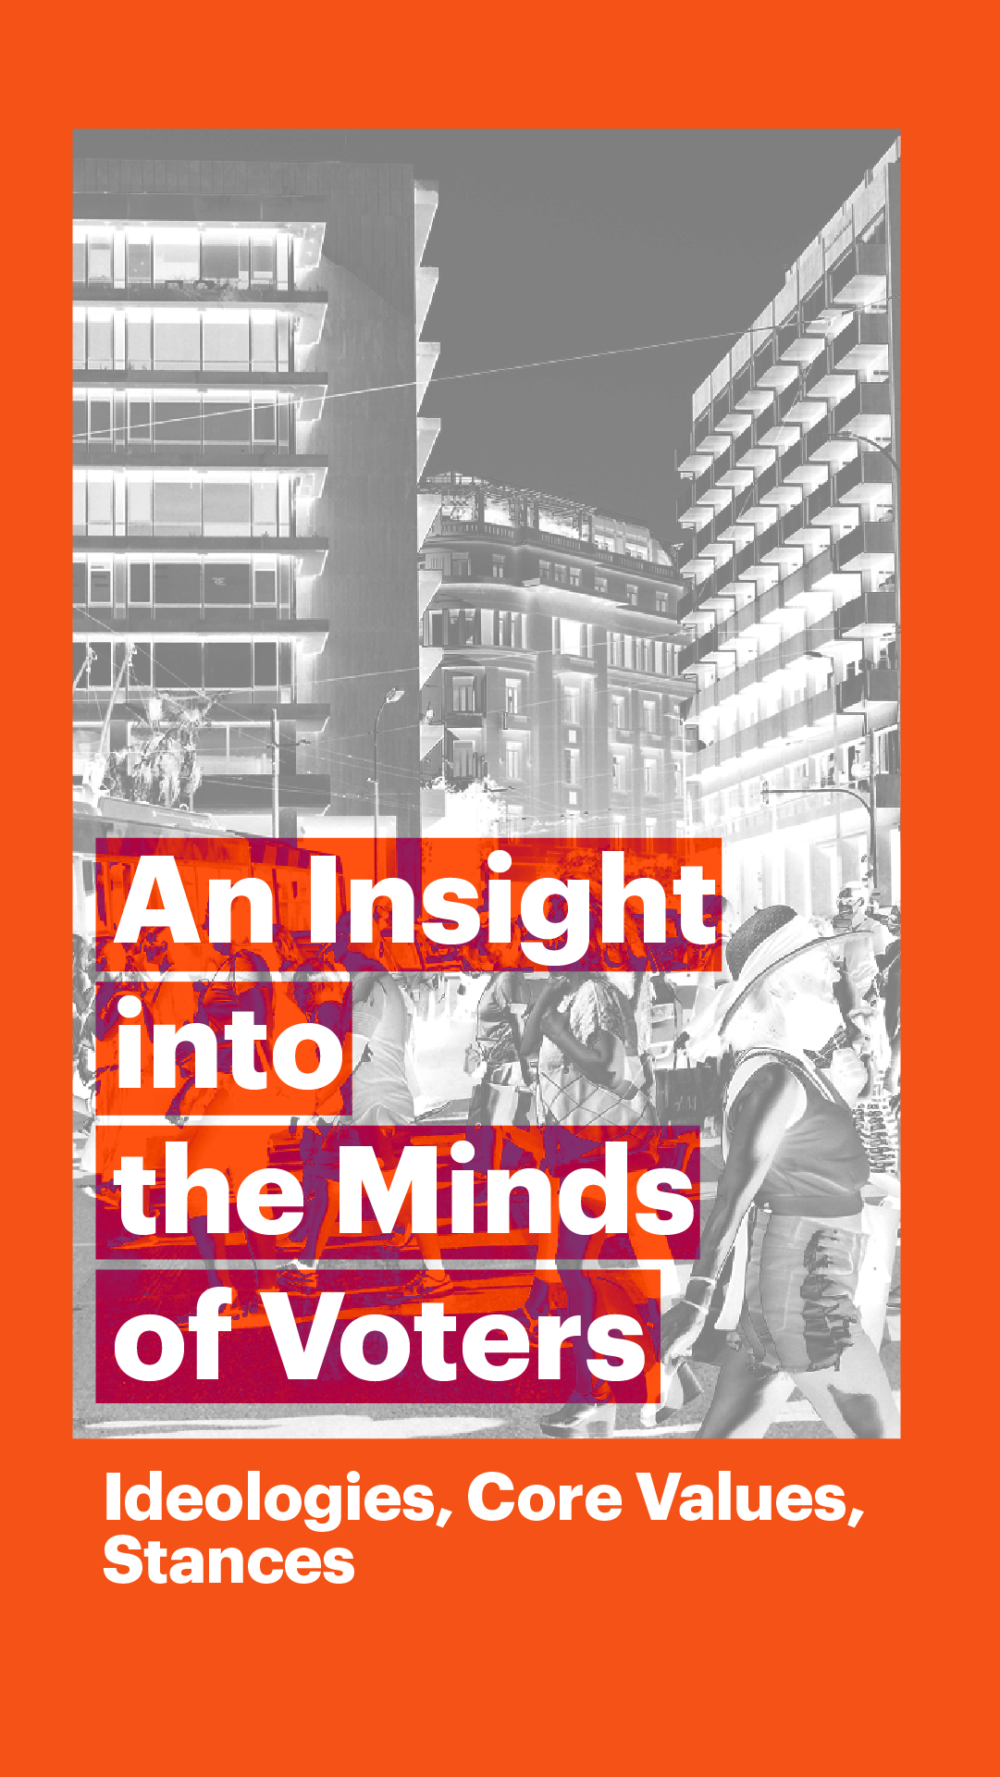 Research Analysis An Insight into the Minds of Voters